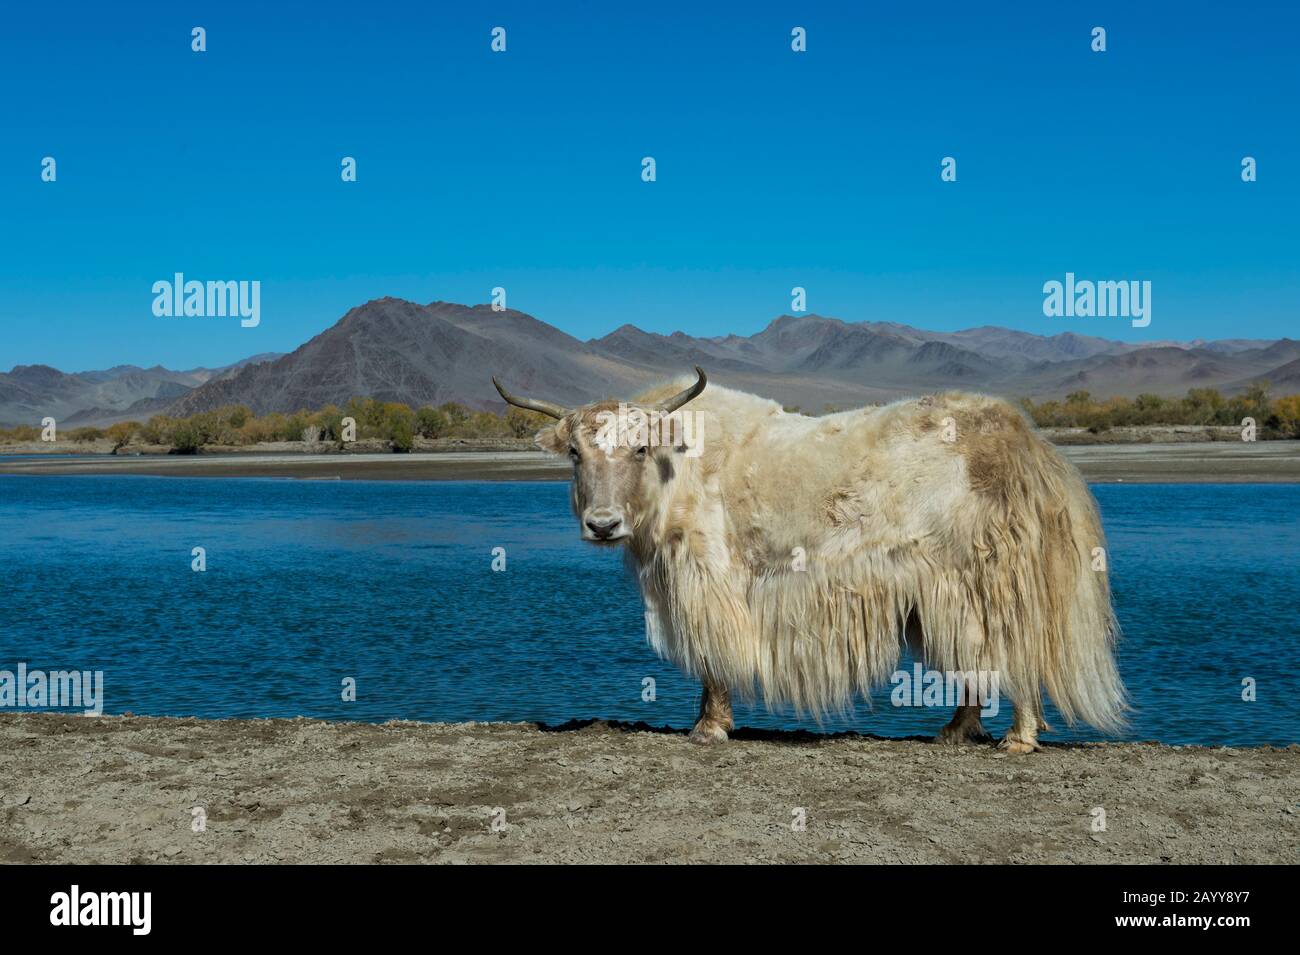 A white yak along the Hovd River near the city of Ulgii (Ölgii) in the Bayan-Ulgii Province in western Mongolia. Stock Photo